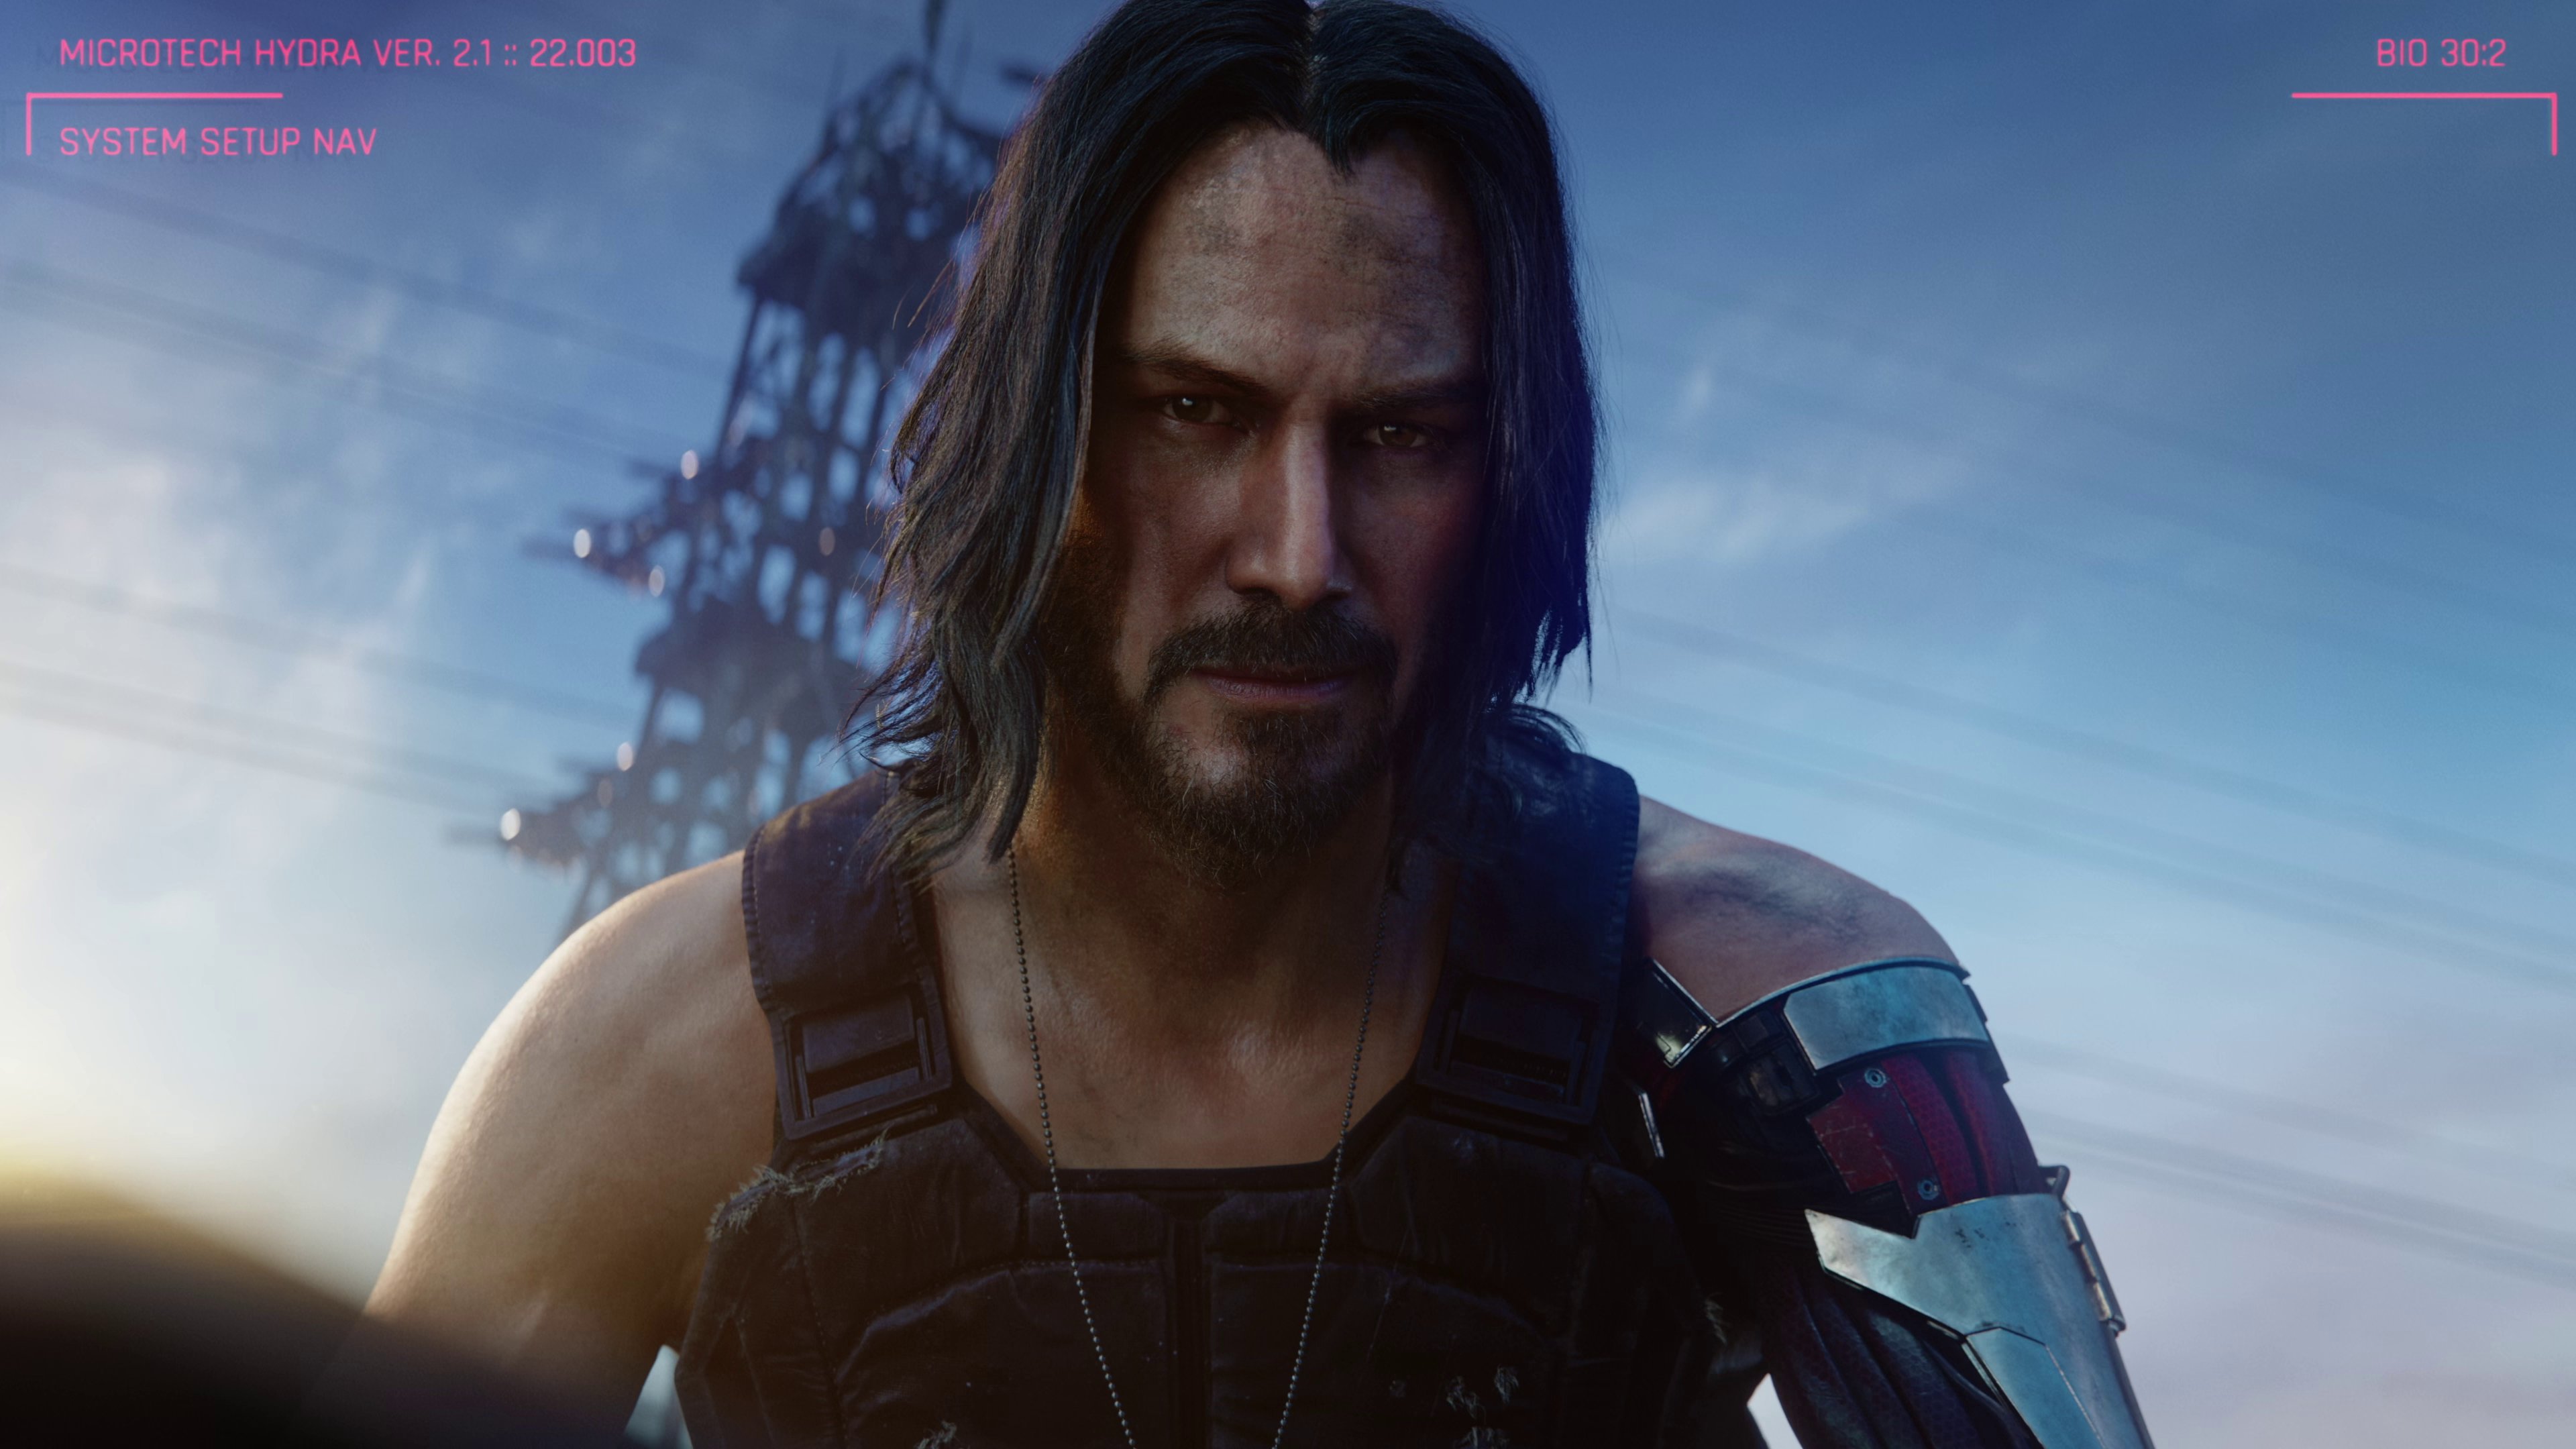 Johnny Silverhand, the Keanu Reeves fella, in a frame from E3 2019's Cyberpunk 2077 cinematic trailer.